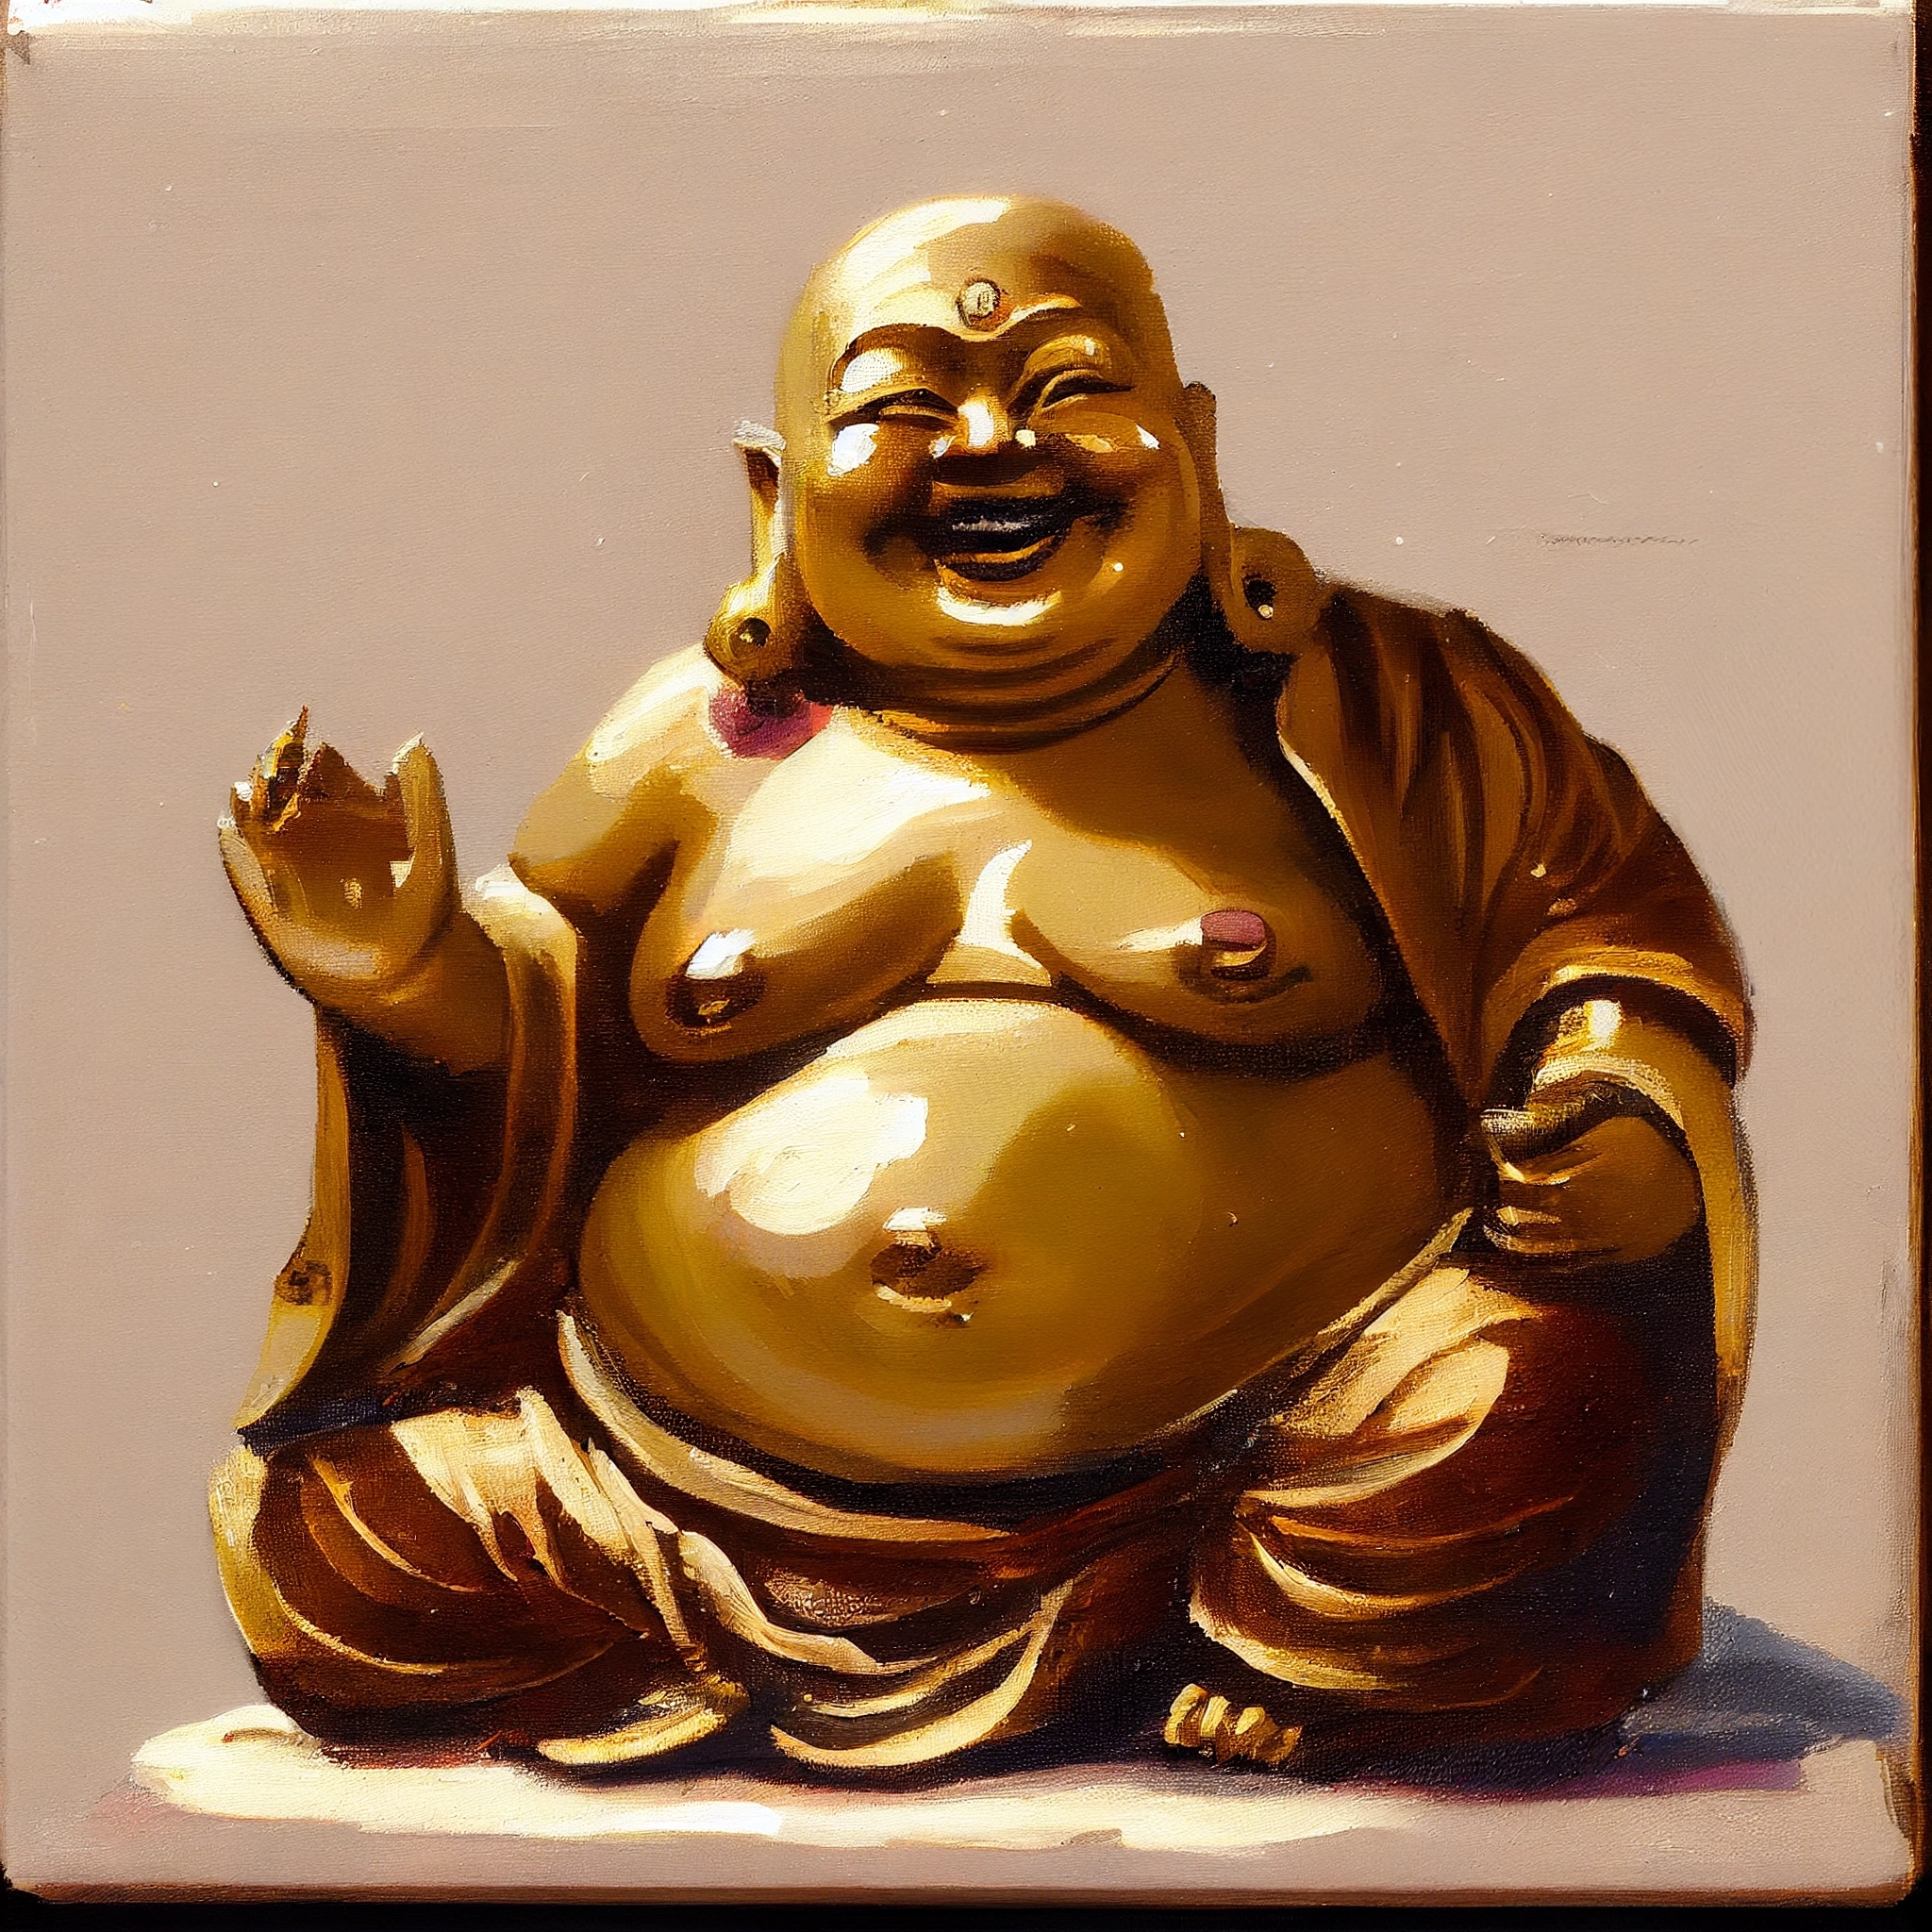 Serene Joy: Oil Art Print of a Laughing Buddha - Ideal for Living Room and Office Wall Decor